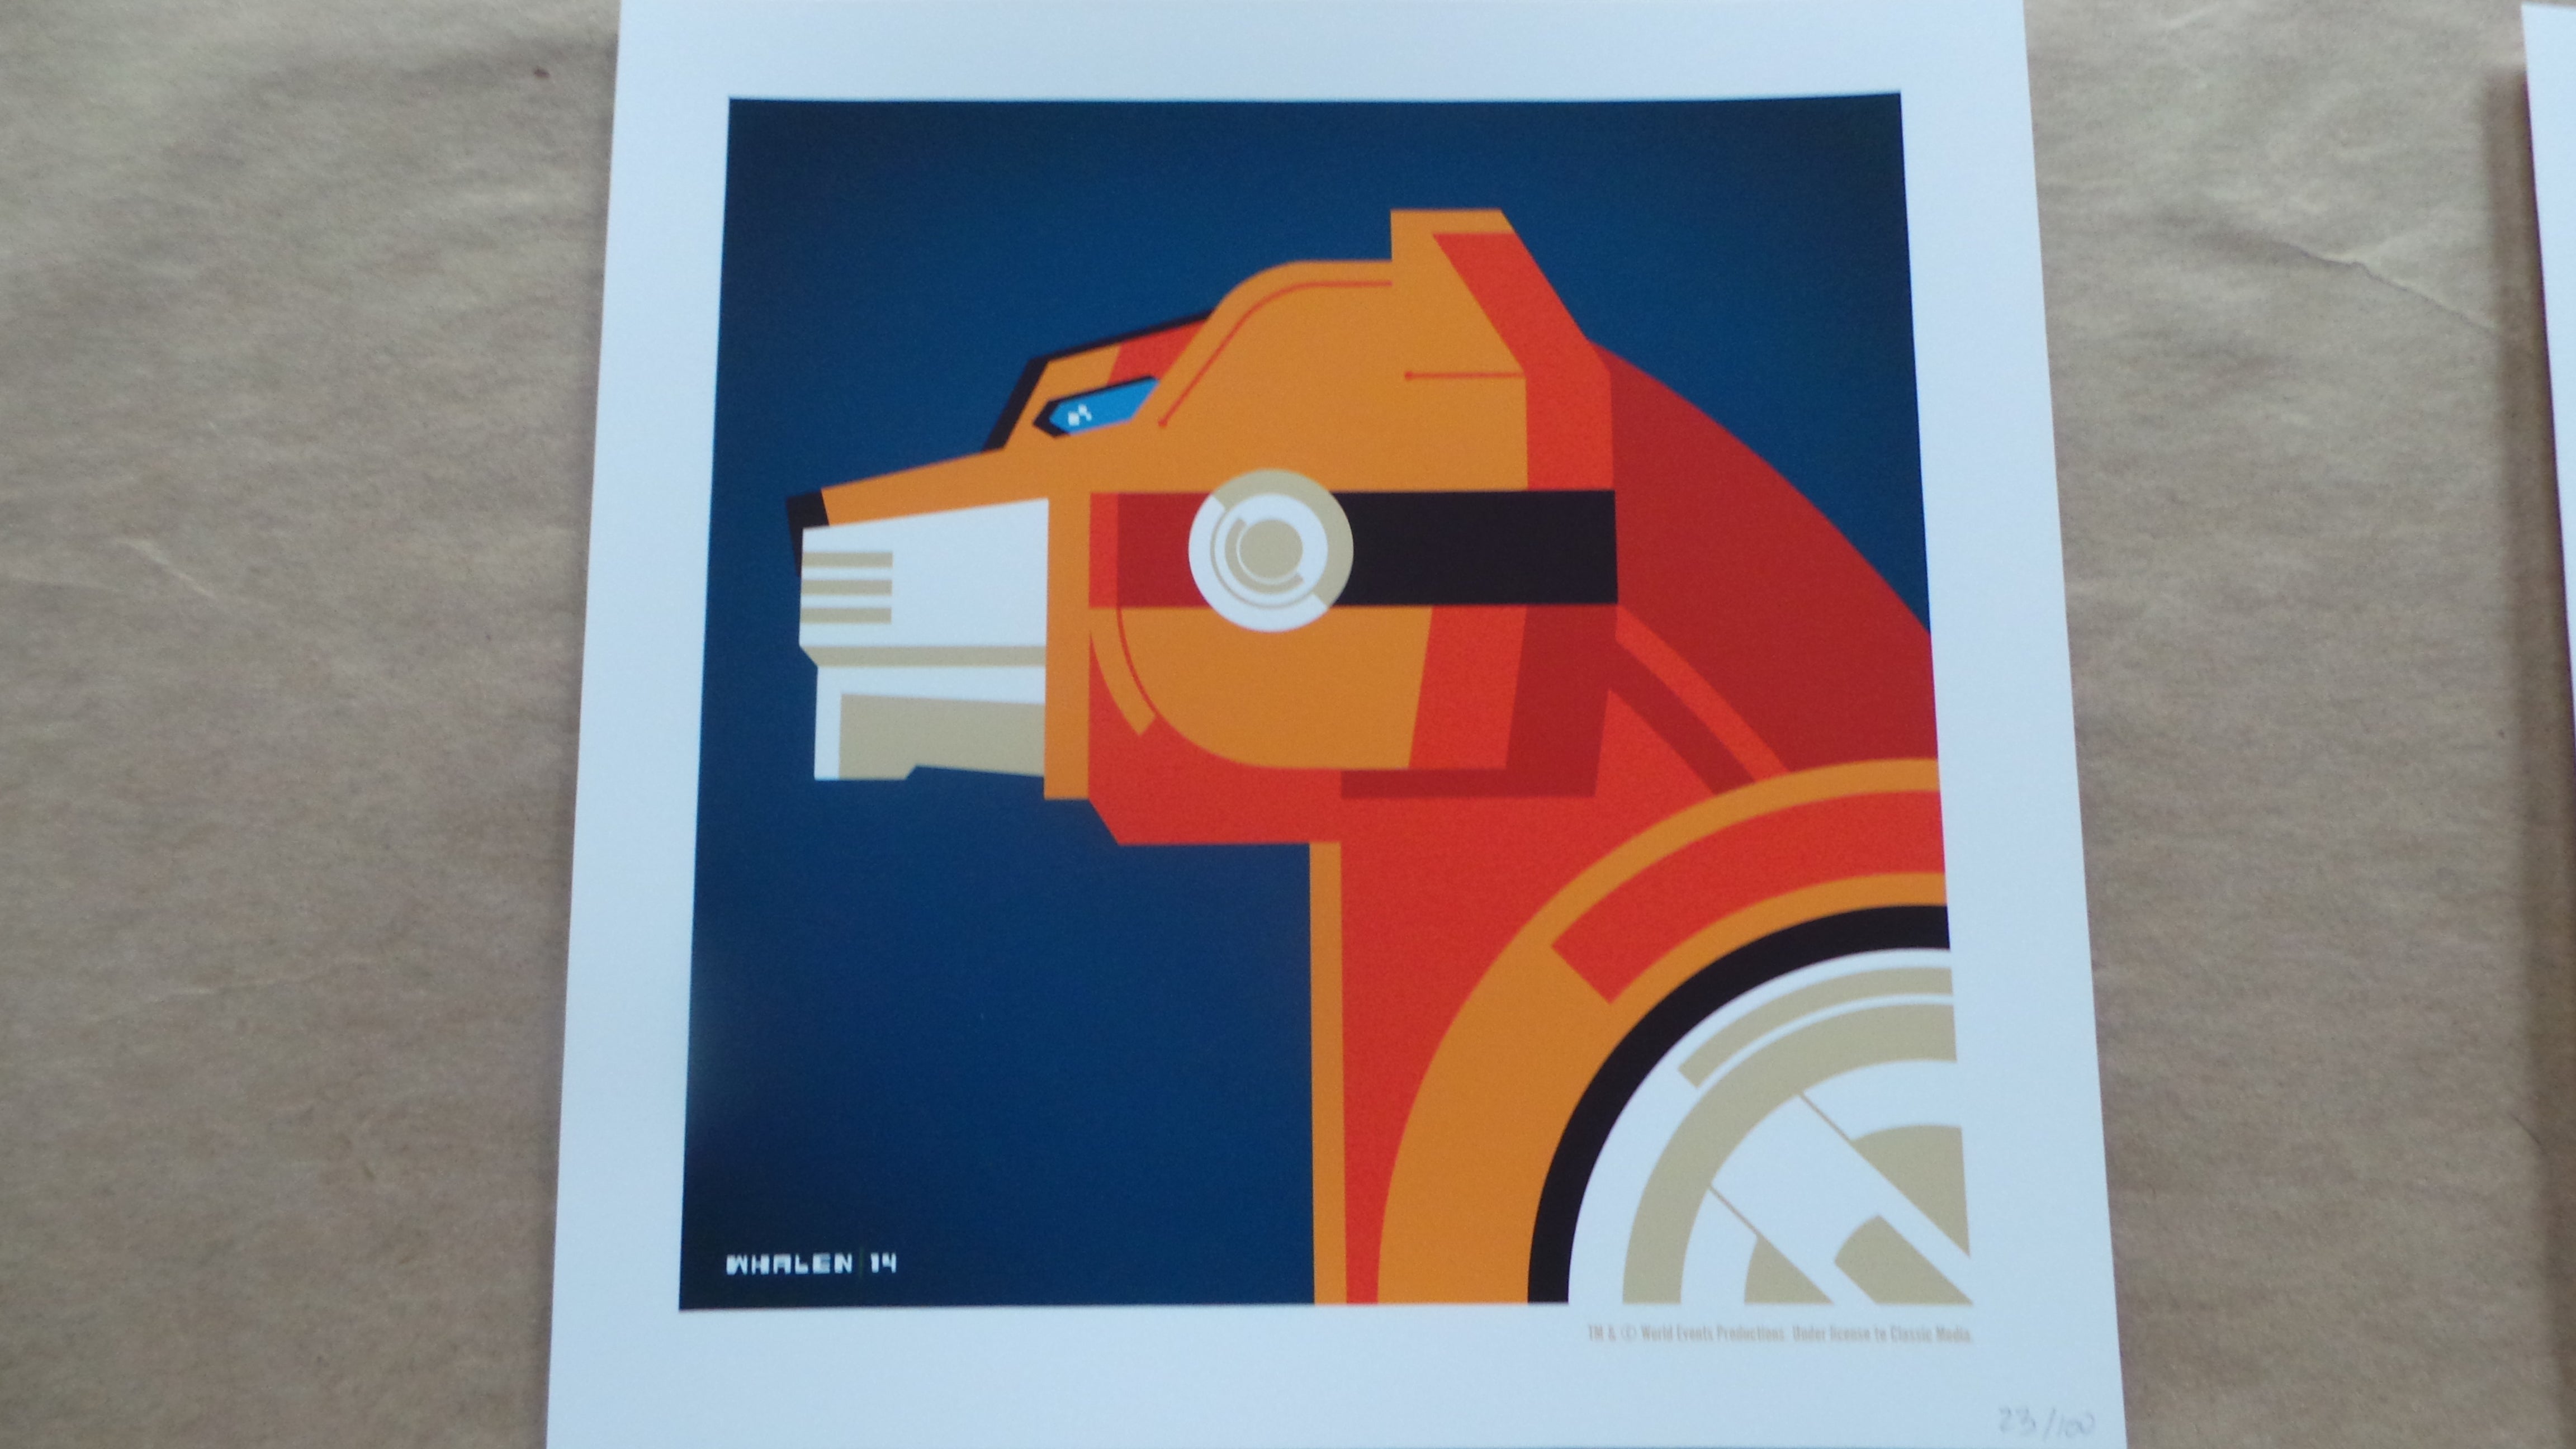 Title:  Voltron Lions and Holofoil Edition 2015  Artist:  Tom Whalen  Edition:  Holofoil Edition, Limited Edition Screen printed poster of 100, numbered  Type: Screen printed poster  Size:  8" x 8", set of 5 and a 24" x 18" print.  Notes: Check out our other listings for more hard-to-find and out-of-print posters.